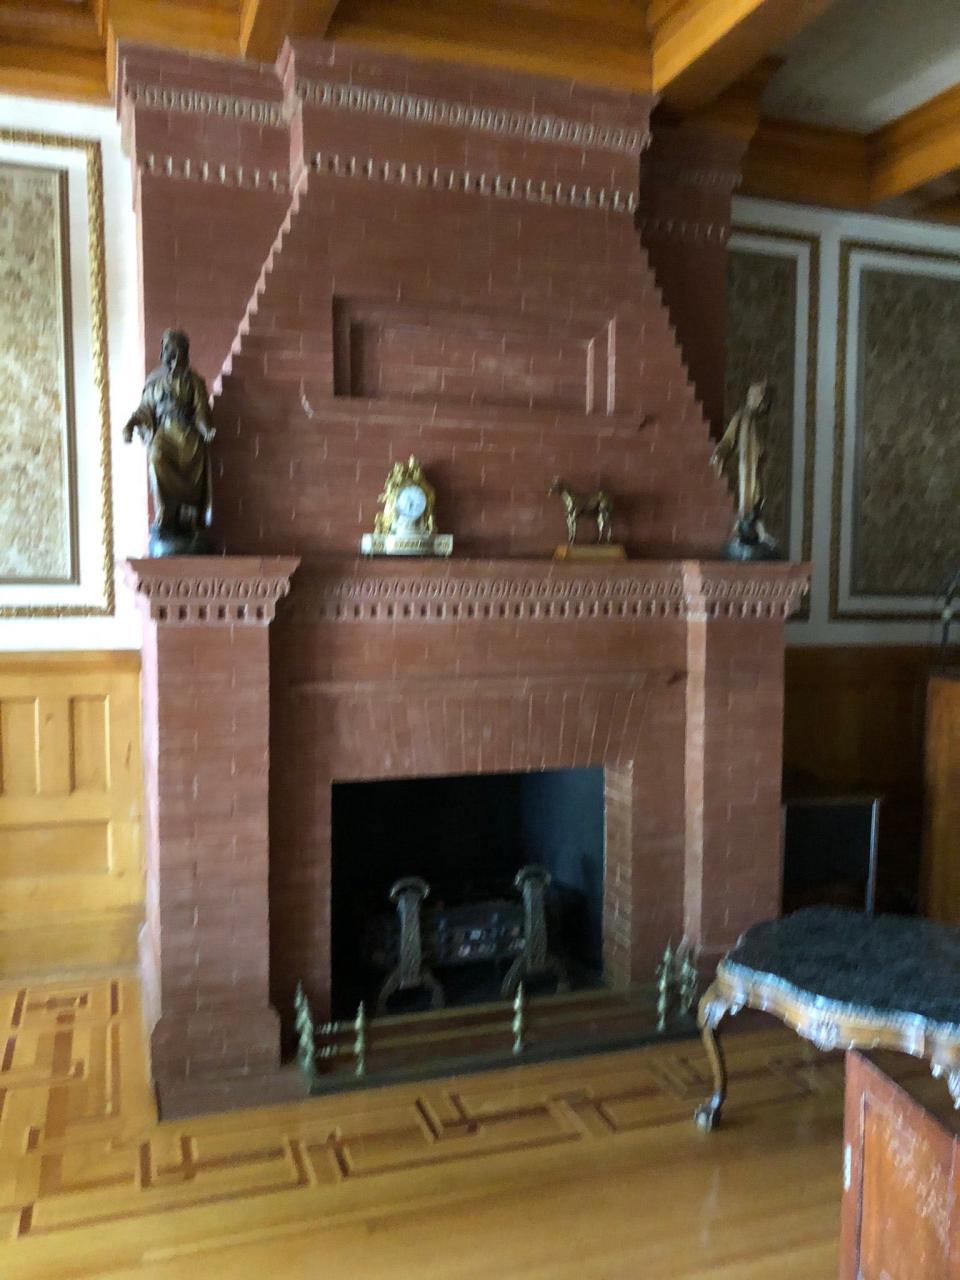 Upon entering the front door of the Bivins Home, a fireplace with inlaid wood stands to the south.